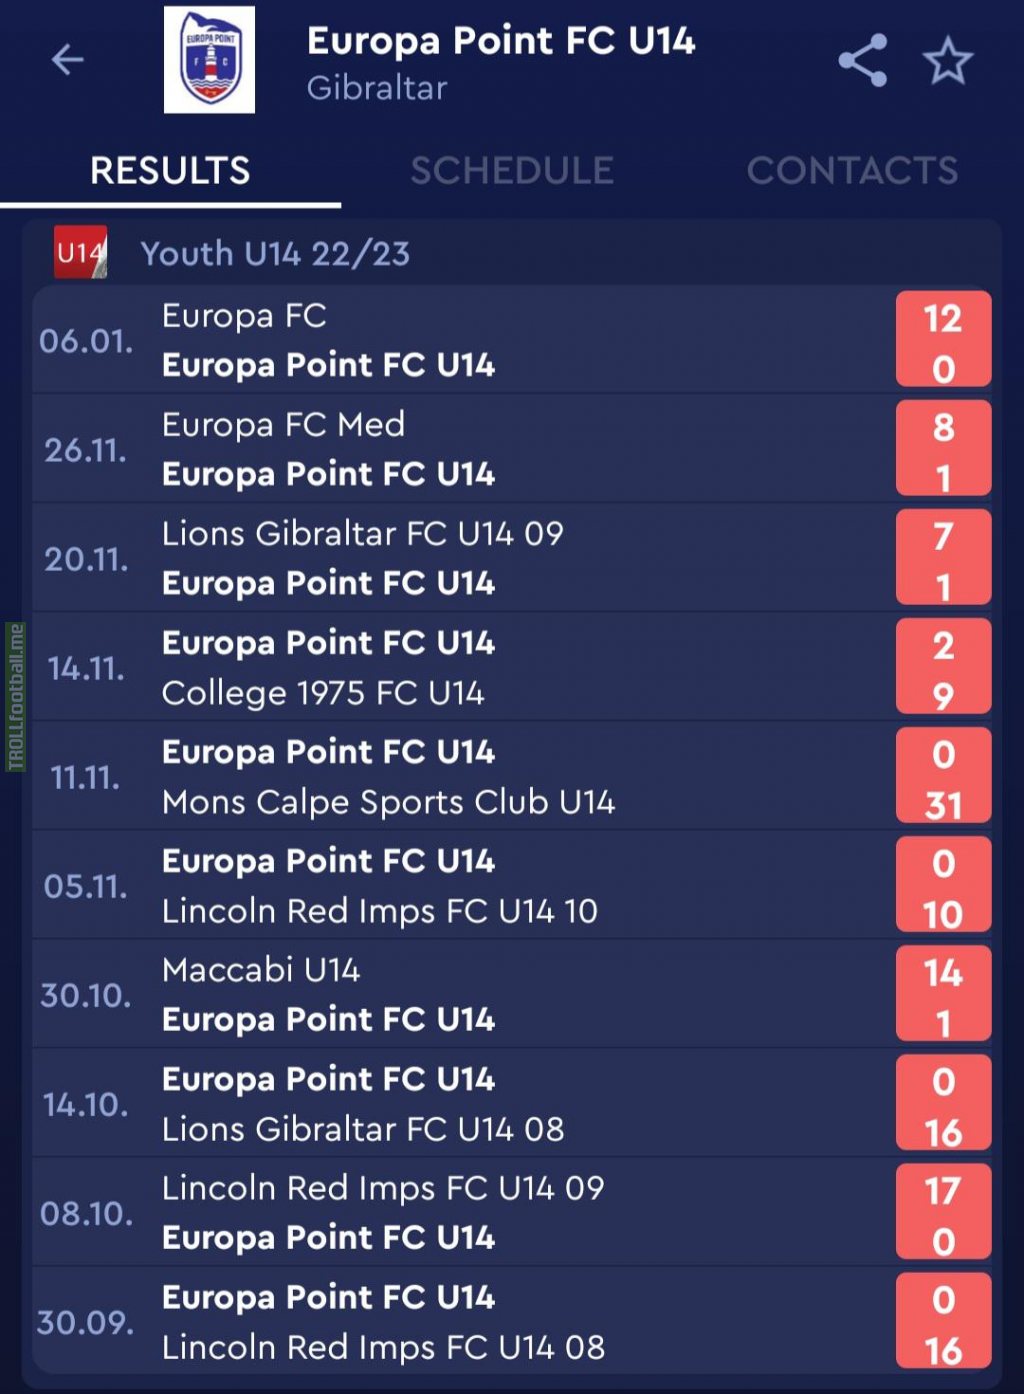 Is this the worst youth team in Europe right now? I do hope the kids aren't completely demoralised by some of the results though (eg the 31-0 loss). Youth football can be harsh sometimes.